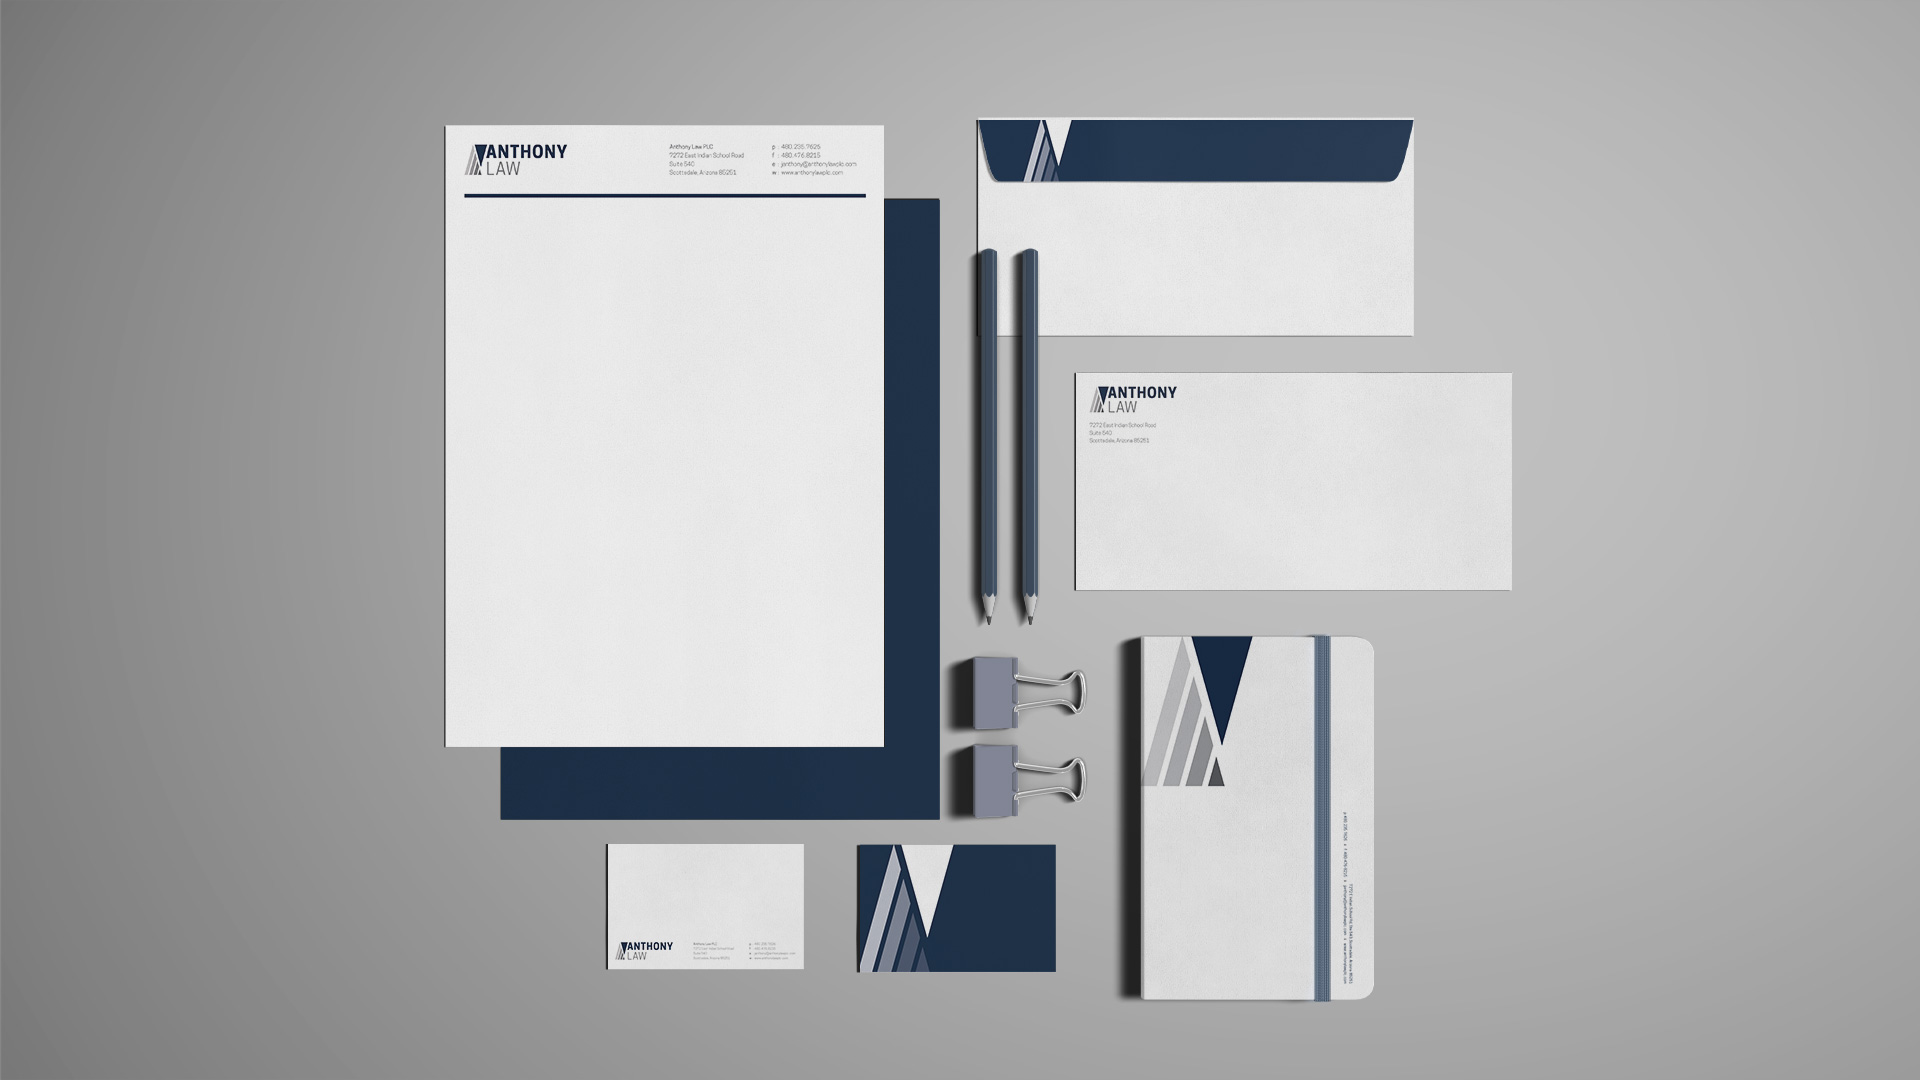 Branded business system for Anthony Law: letterhead, business cards, envelope and notebook